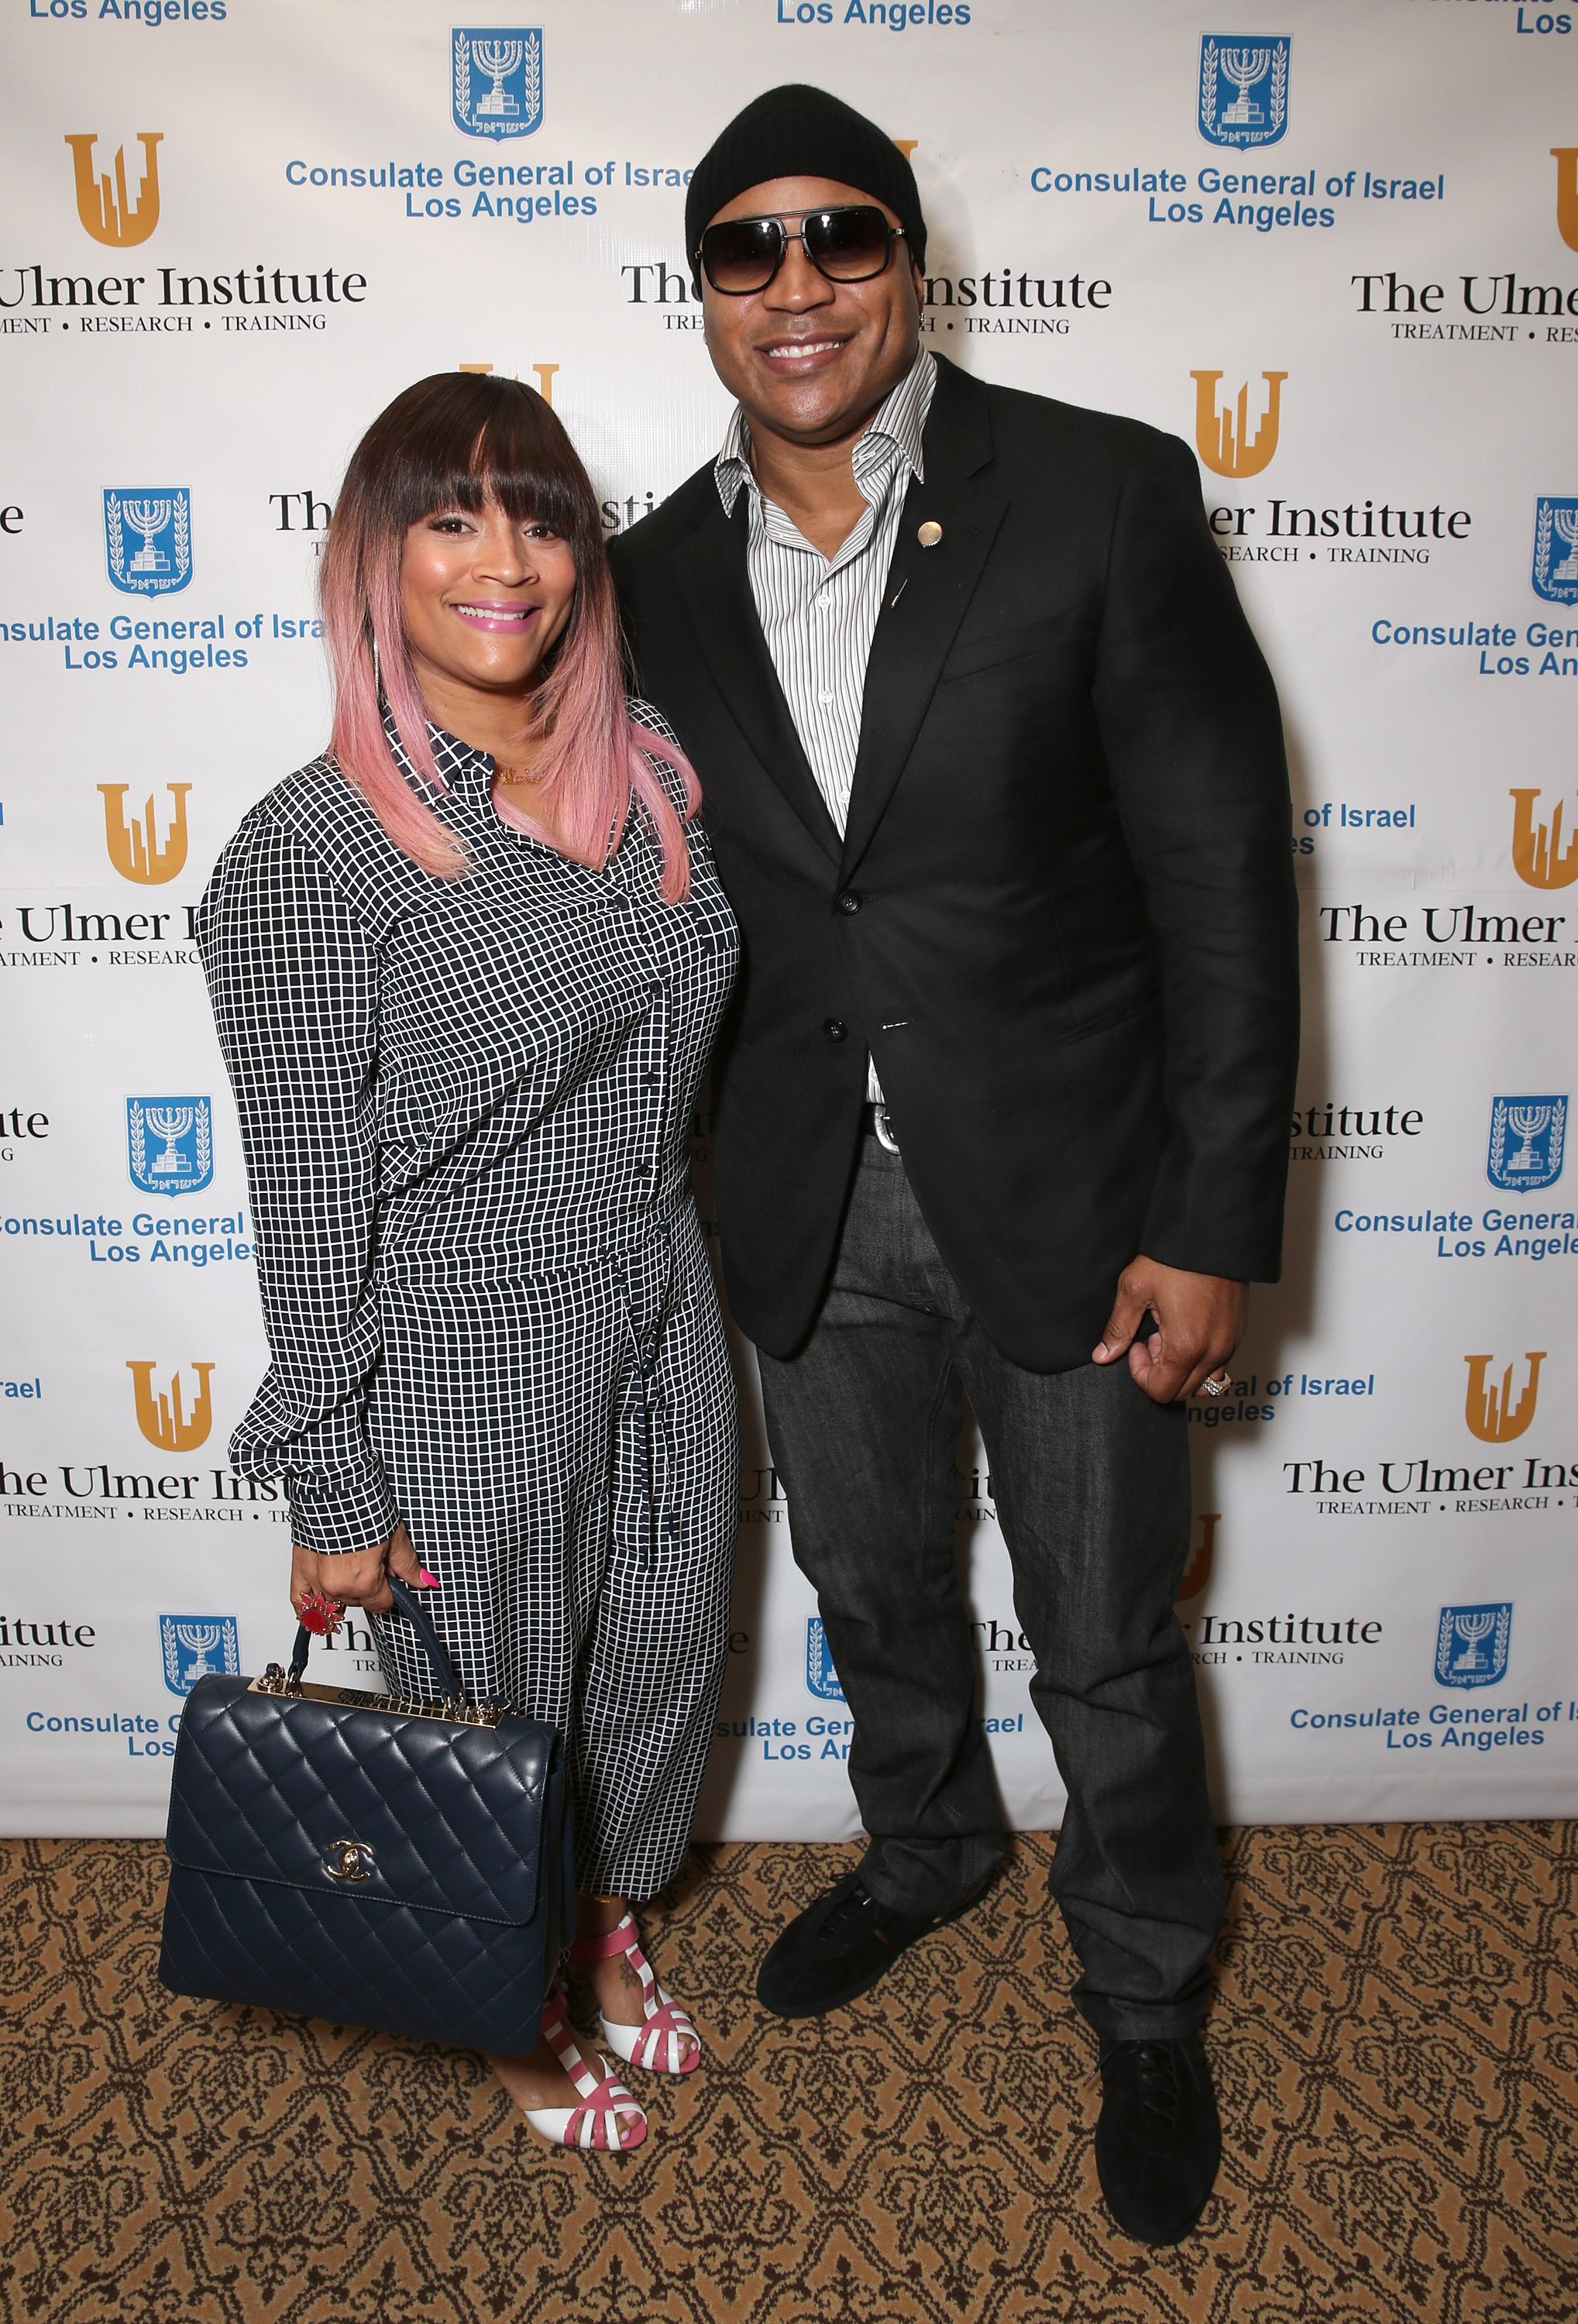 Simone Smith and LL Cool J at the Ulmer Institute Launch Celebration in Beverly Hills, California, 2016 | Source: Getty Images